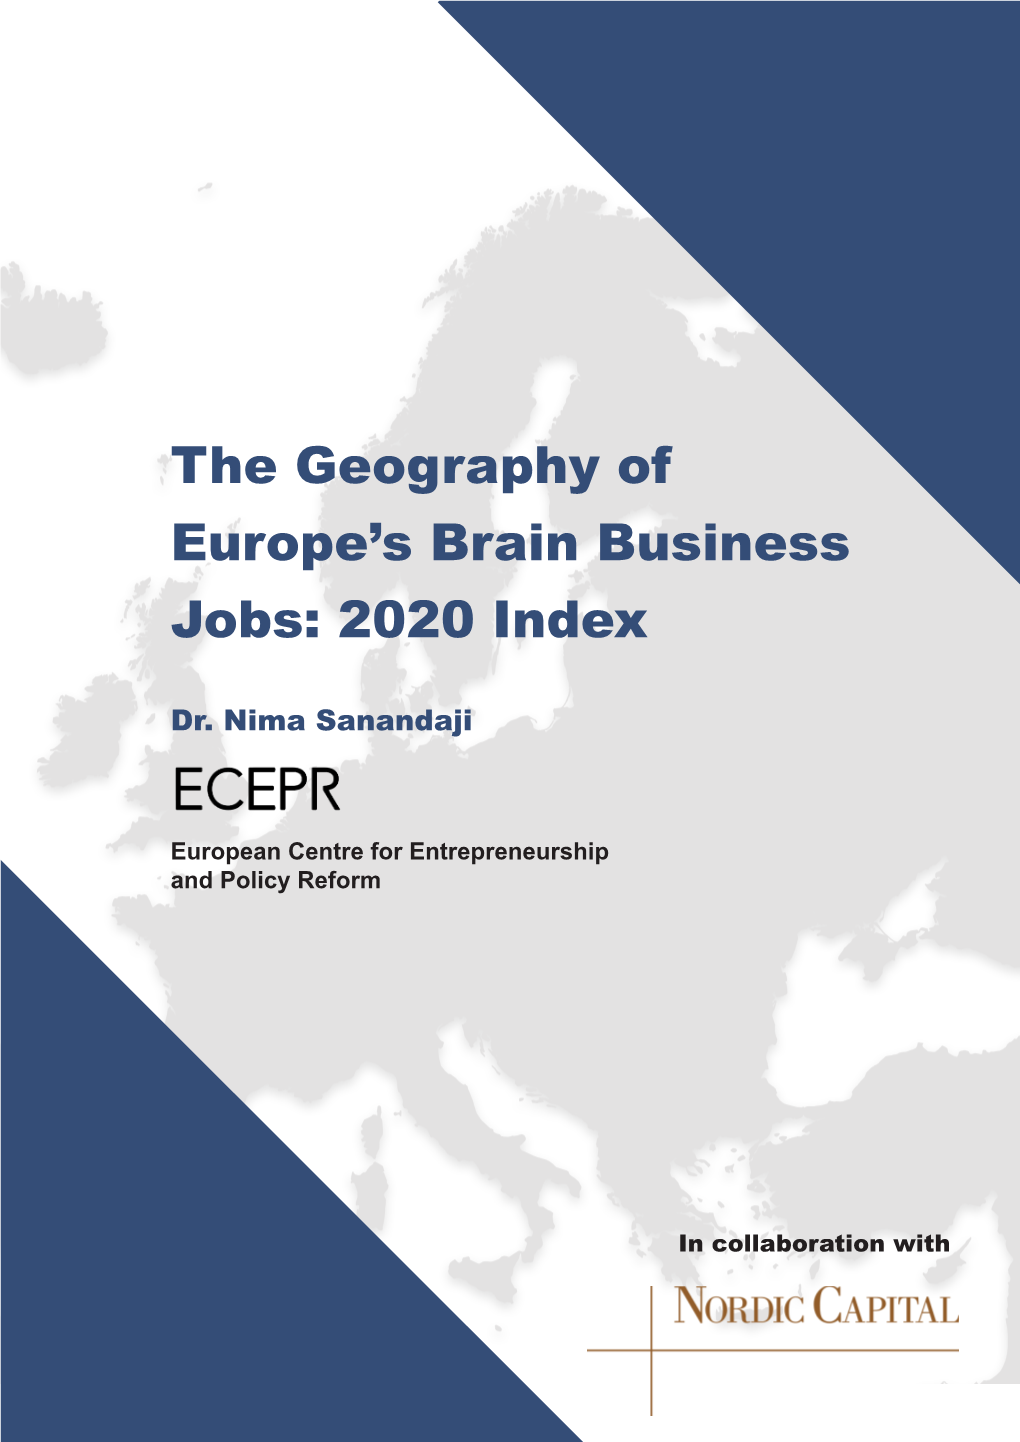 The Geography of Europe's Brain Business Jobs: 2020 Index